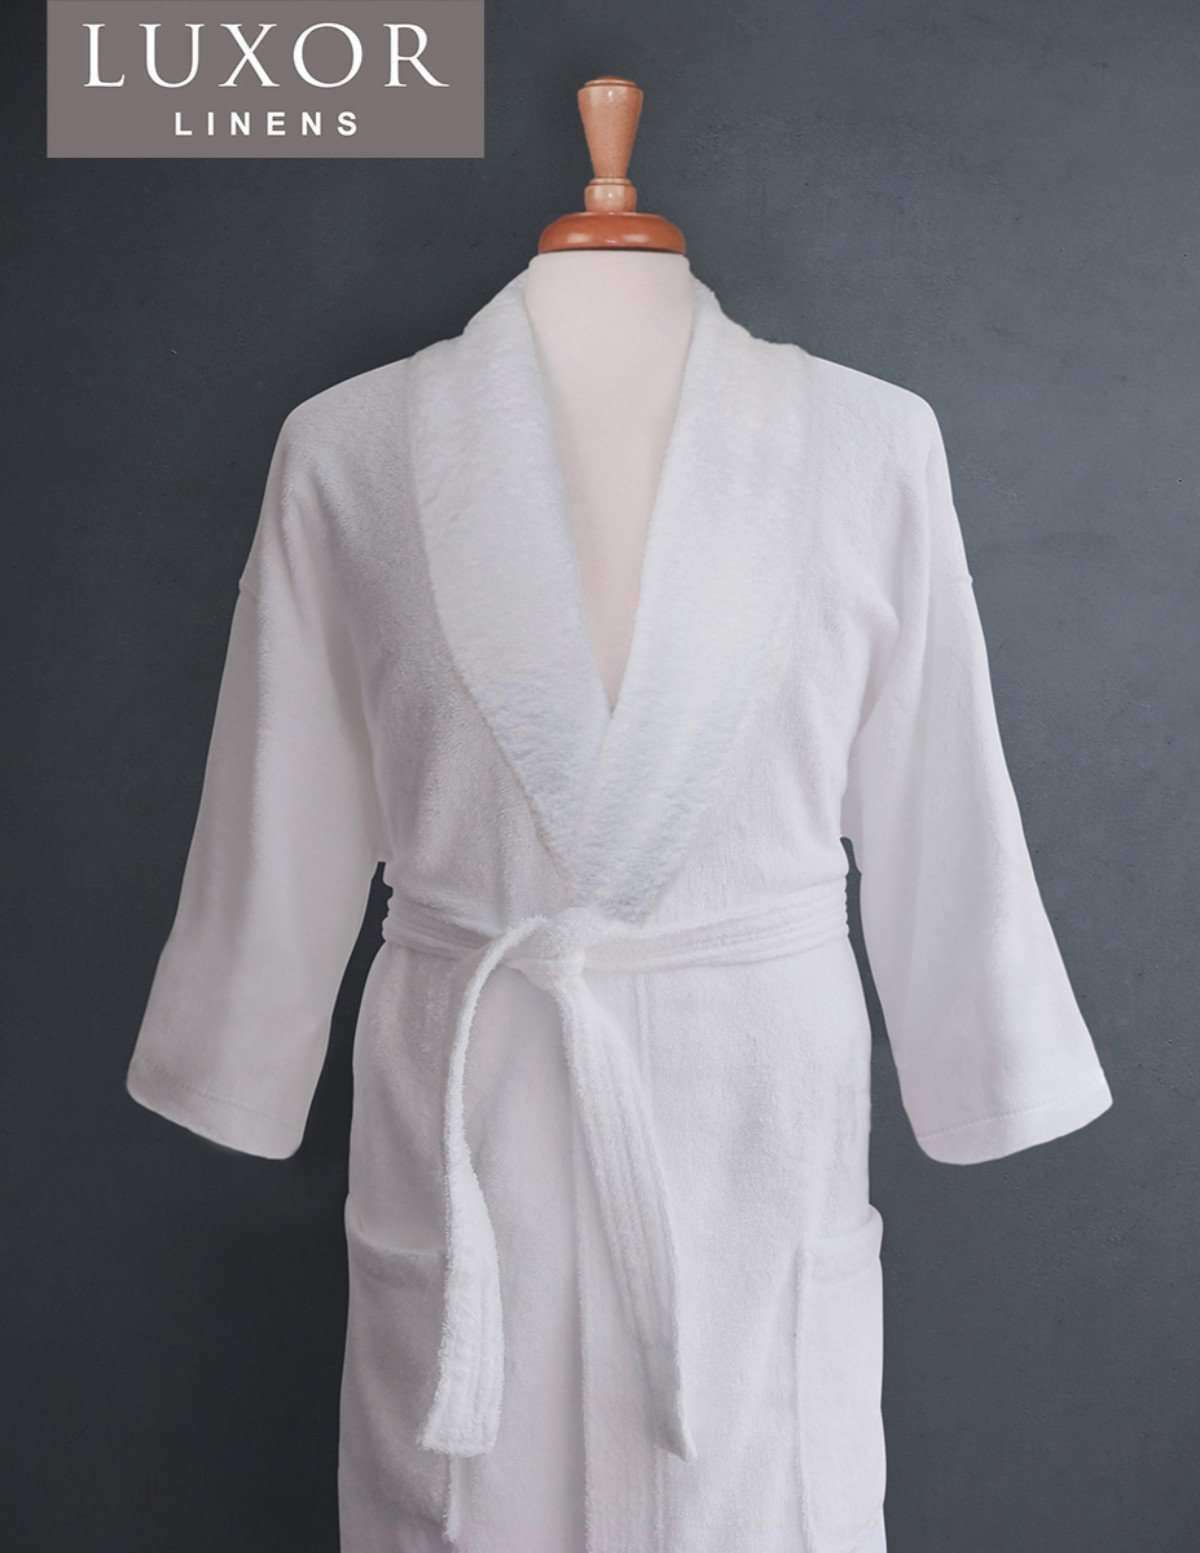 Lakeview Signature Egyptian Cotton Terry Spa Robes - Luxor Linens 